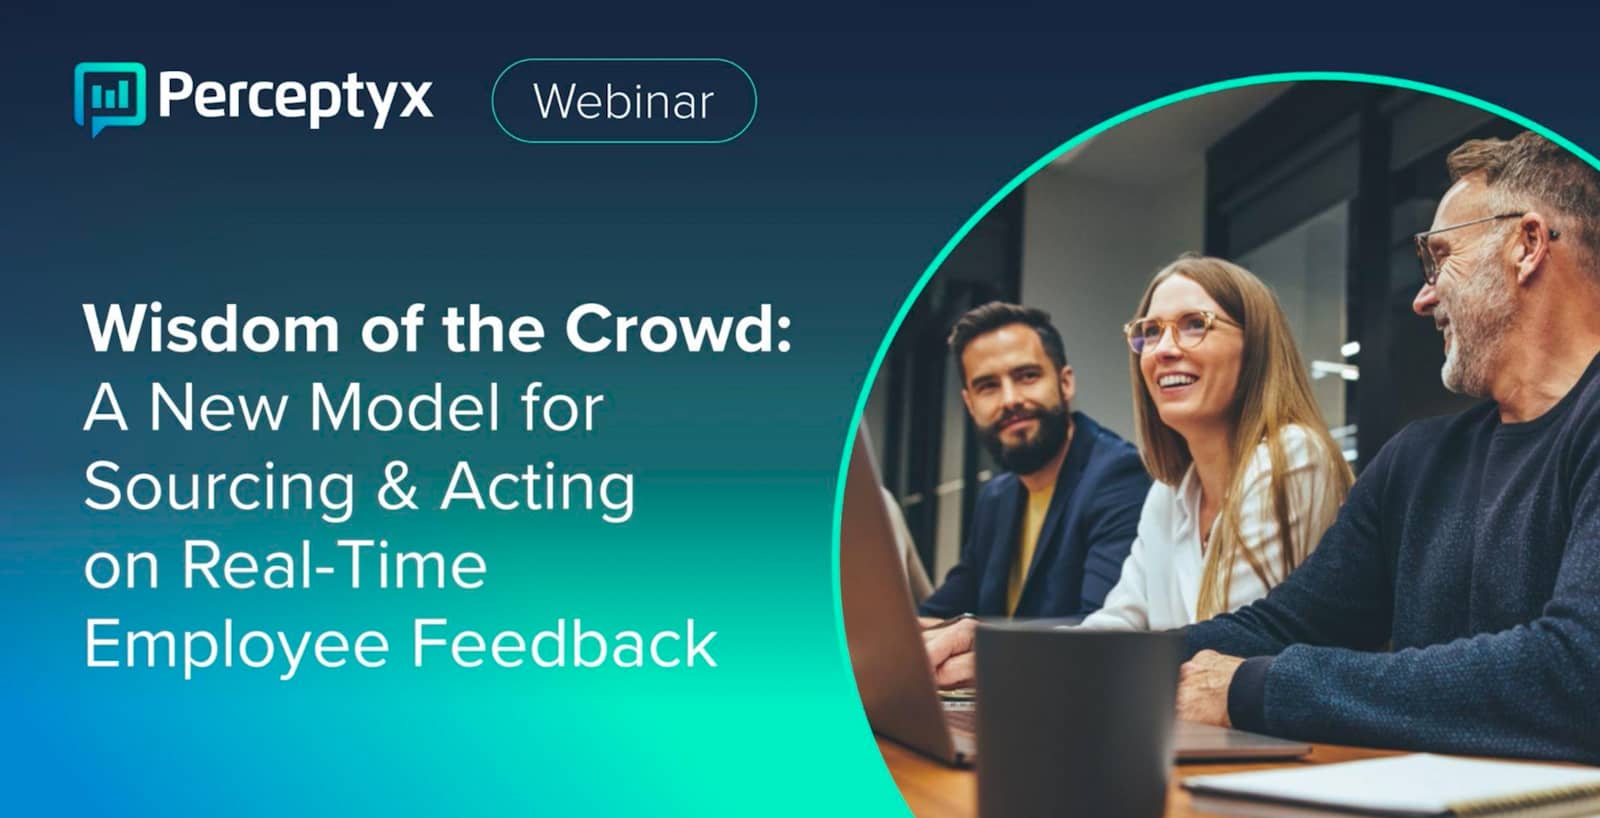 Wisdom of the Crowd: A New Model for Sourcing & Acting on Real-Time Employee Feedback